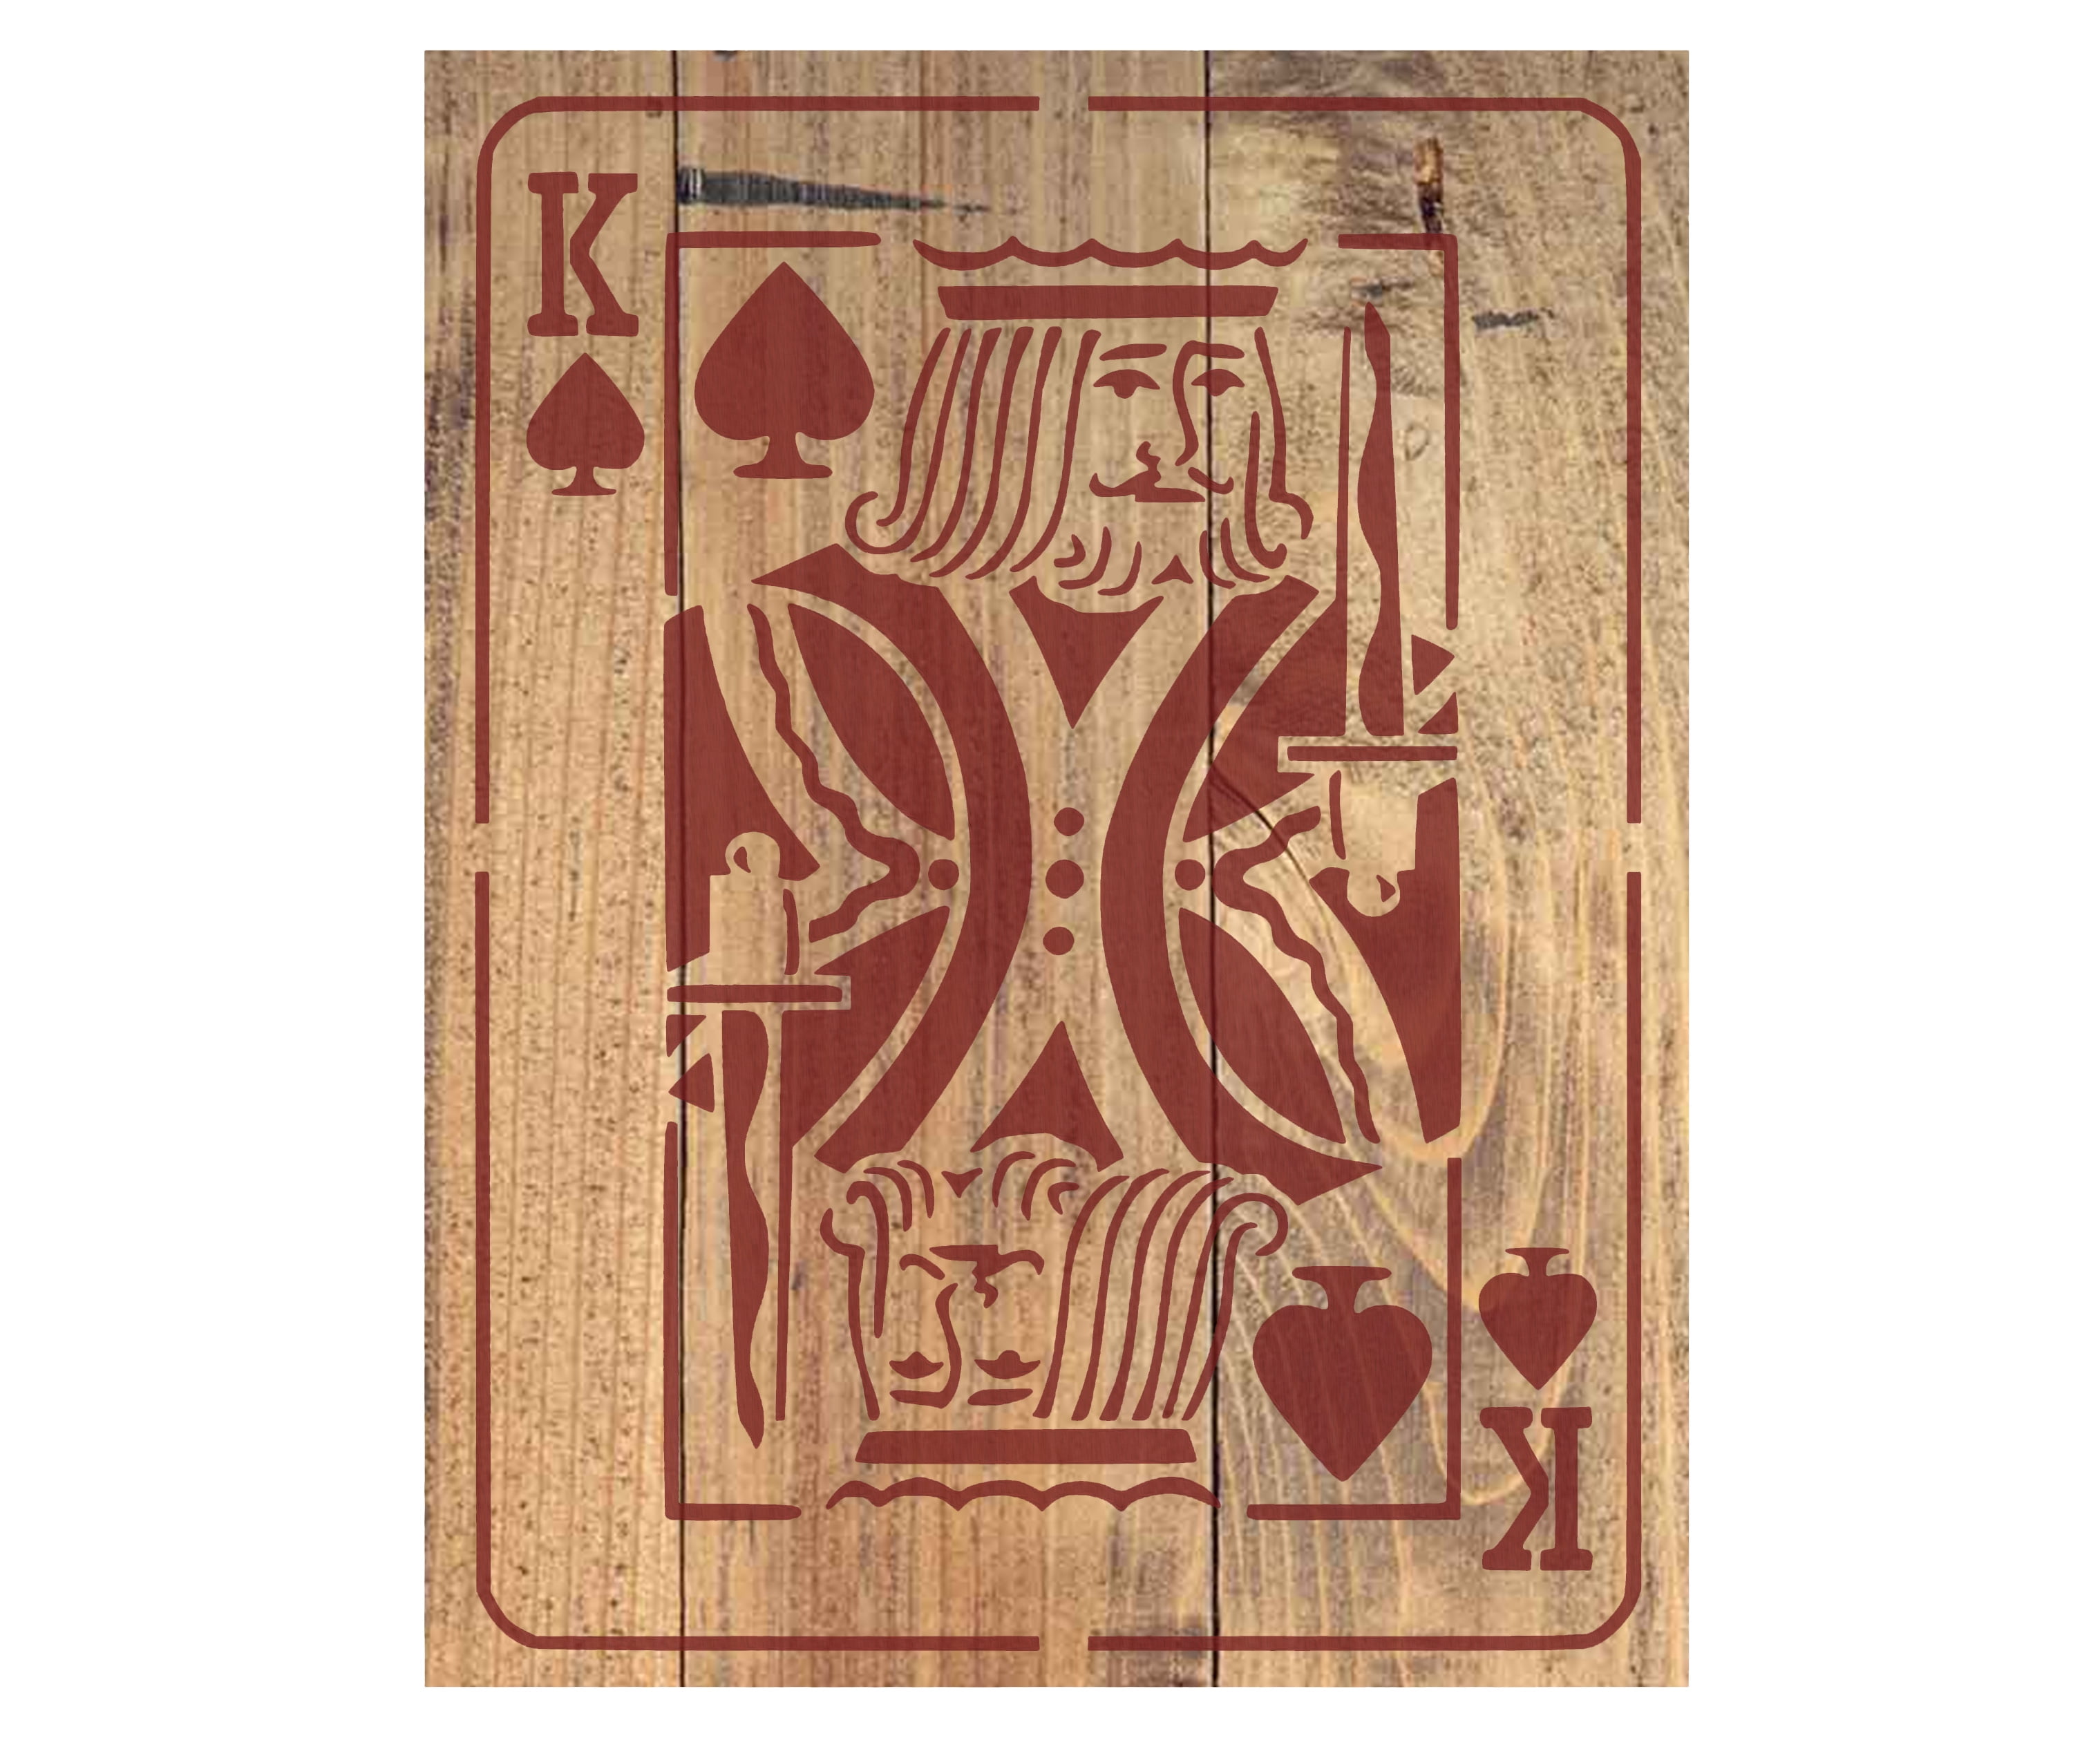 13 Playing Card King of Spades 8.5 x 11 Inches Stencil 